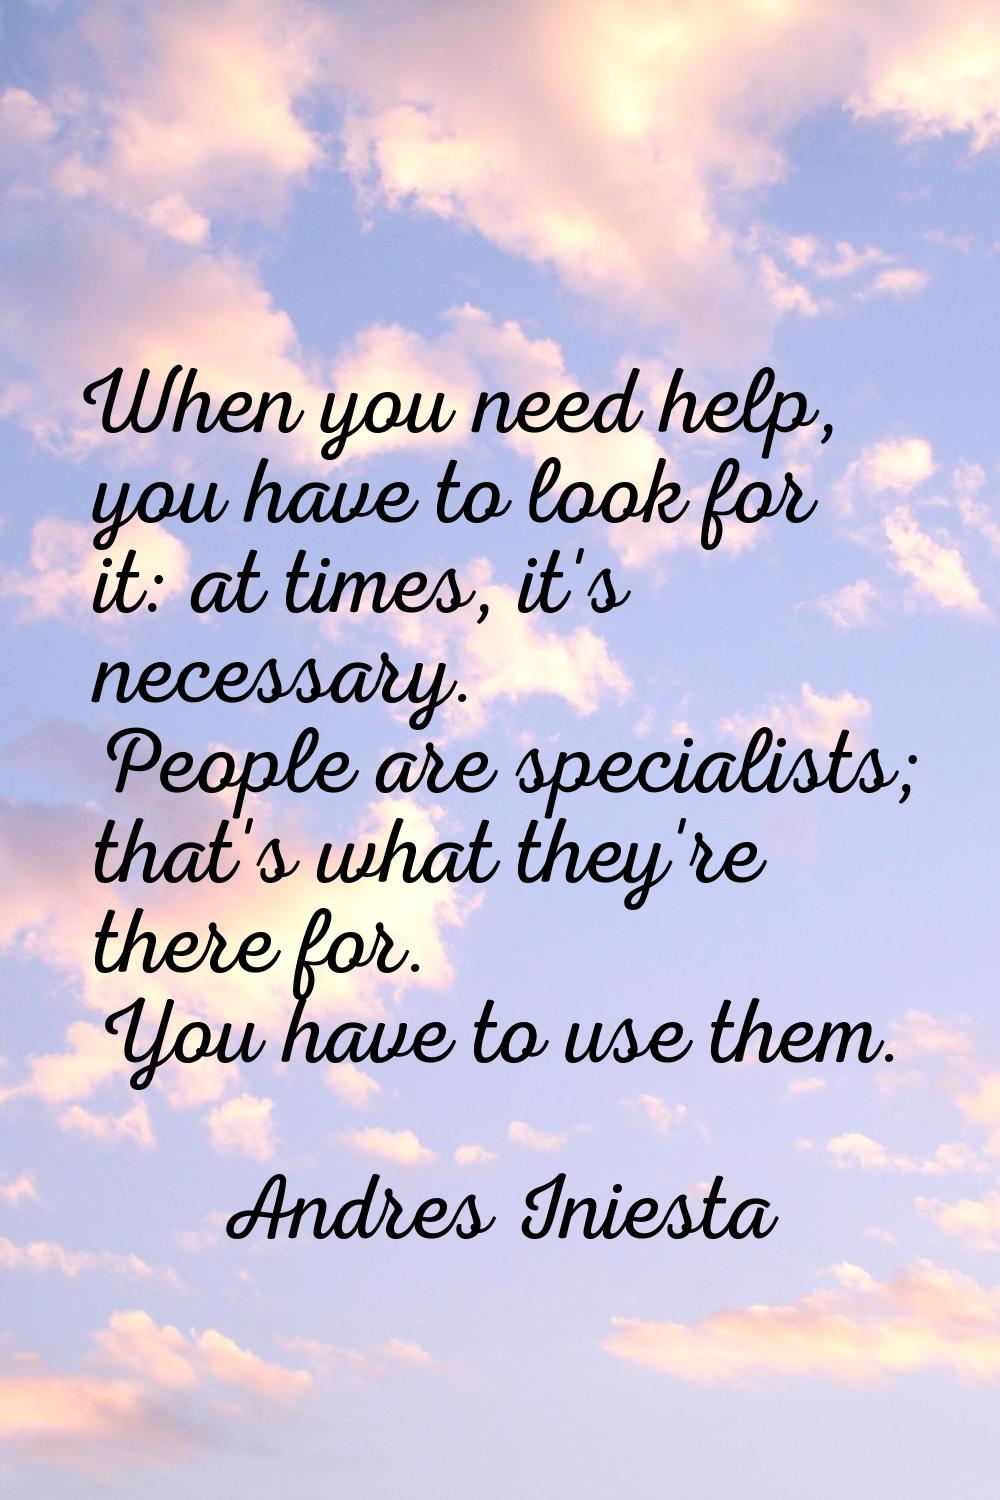 When you need help, you have to look for it: at times, it's necessary. People are specialists; that